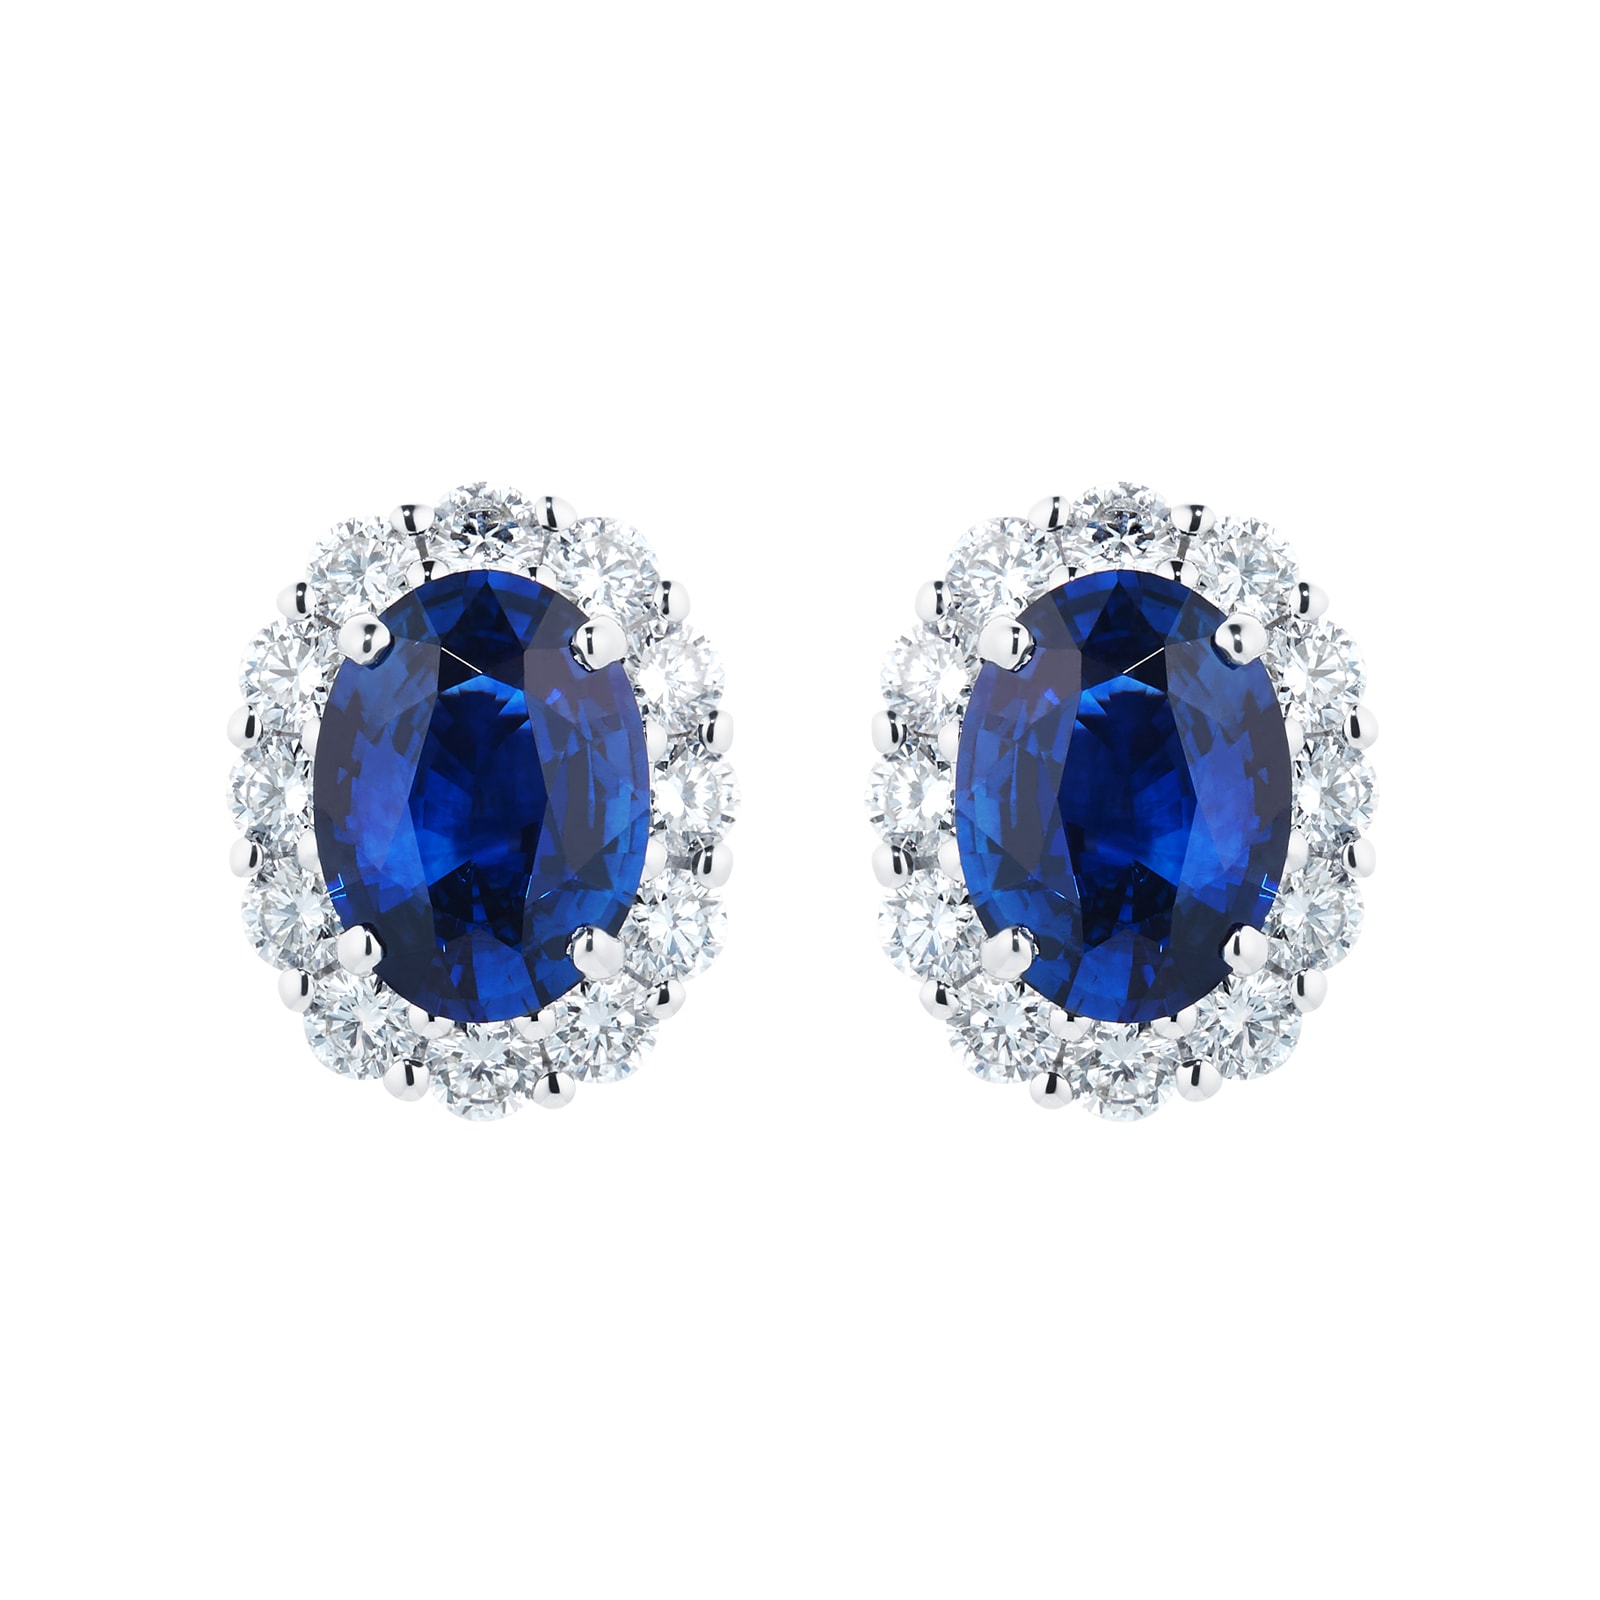 18ct White Gold Oval Cut Sapphire and Diamond Halo Stud Earrings